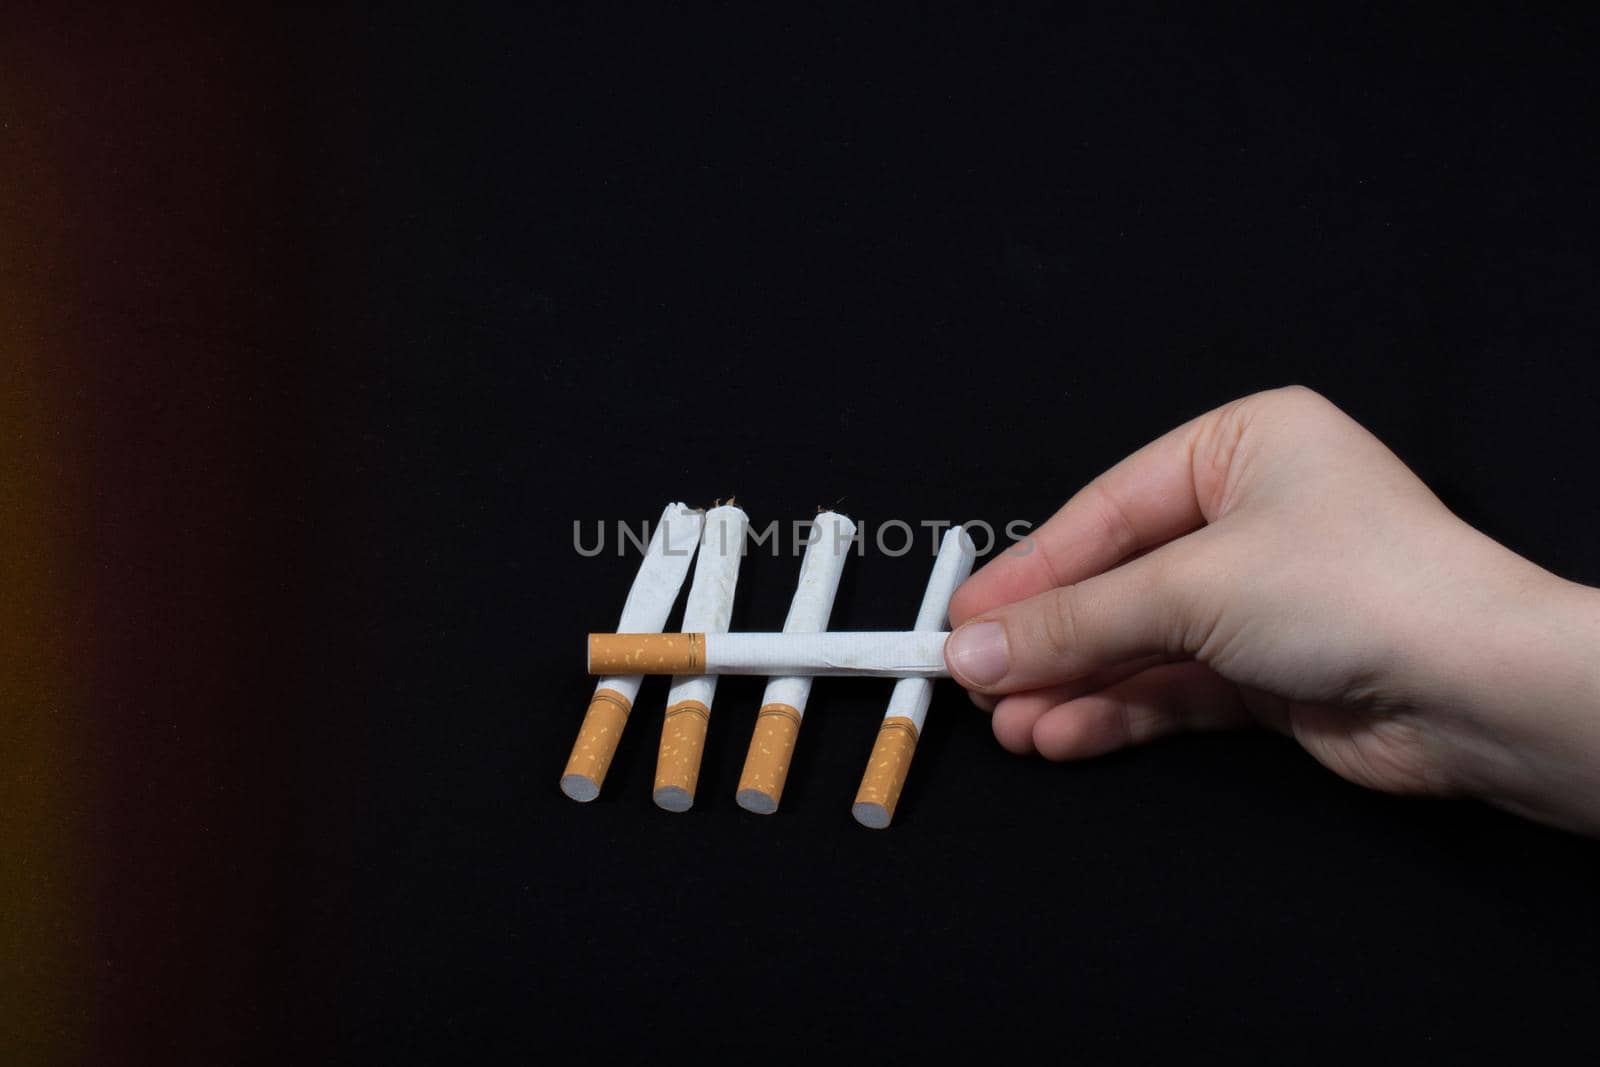 Hand is holding crossed cigarettes on black background